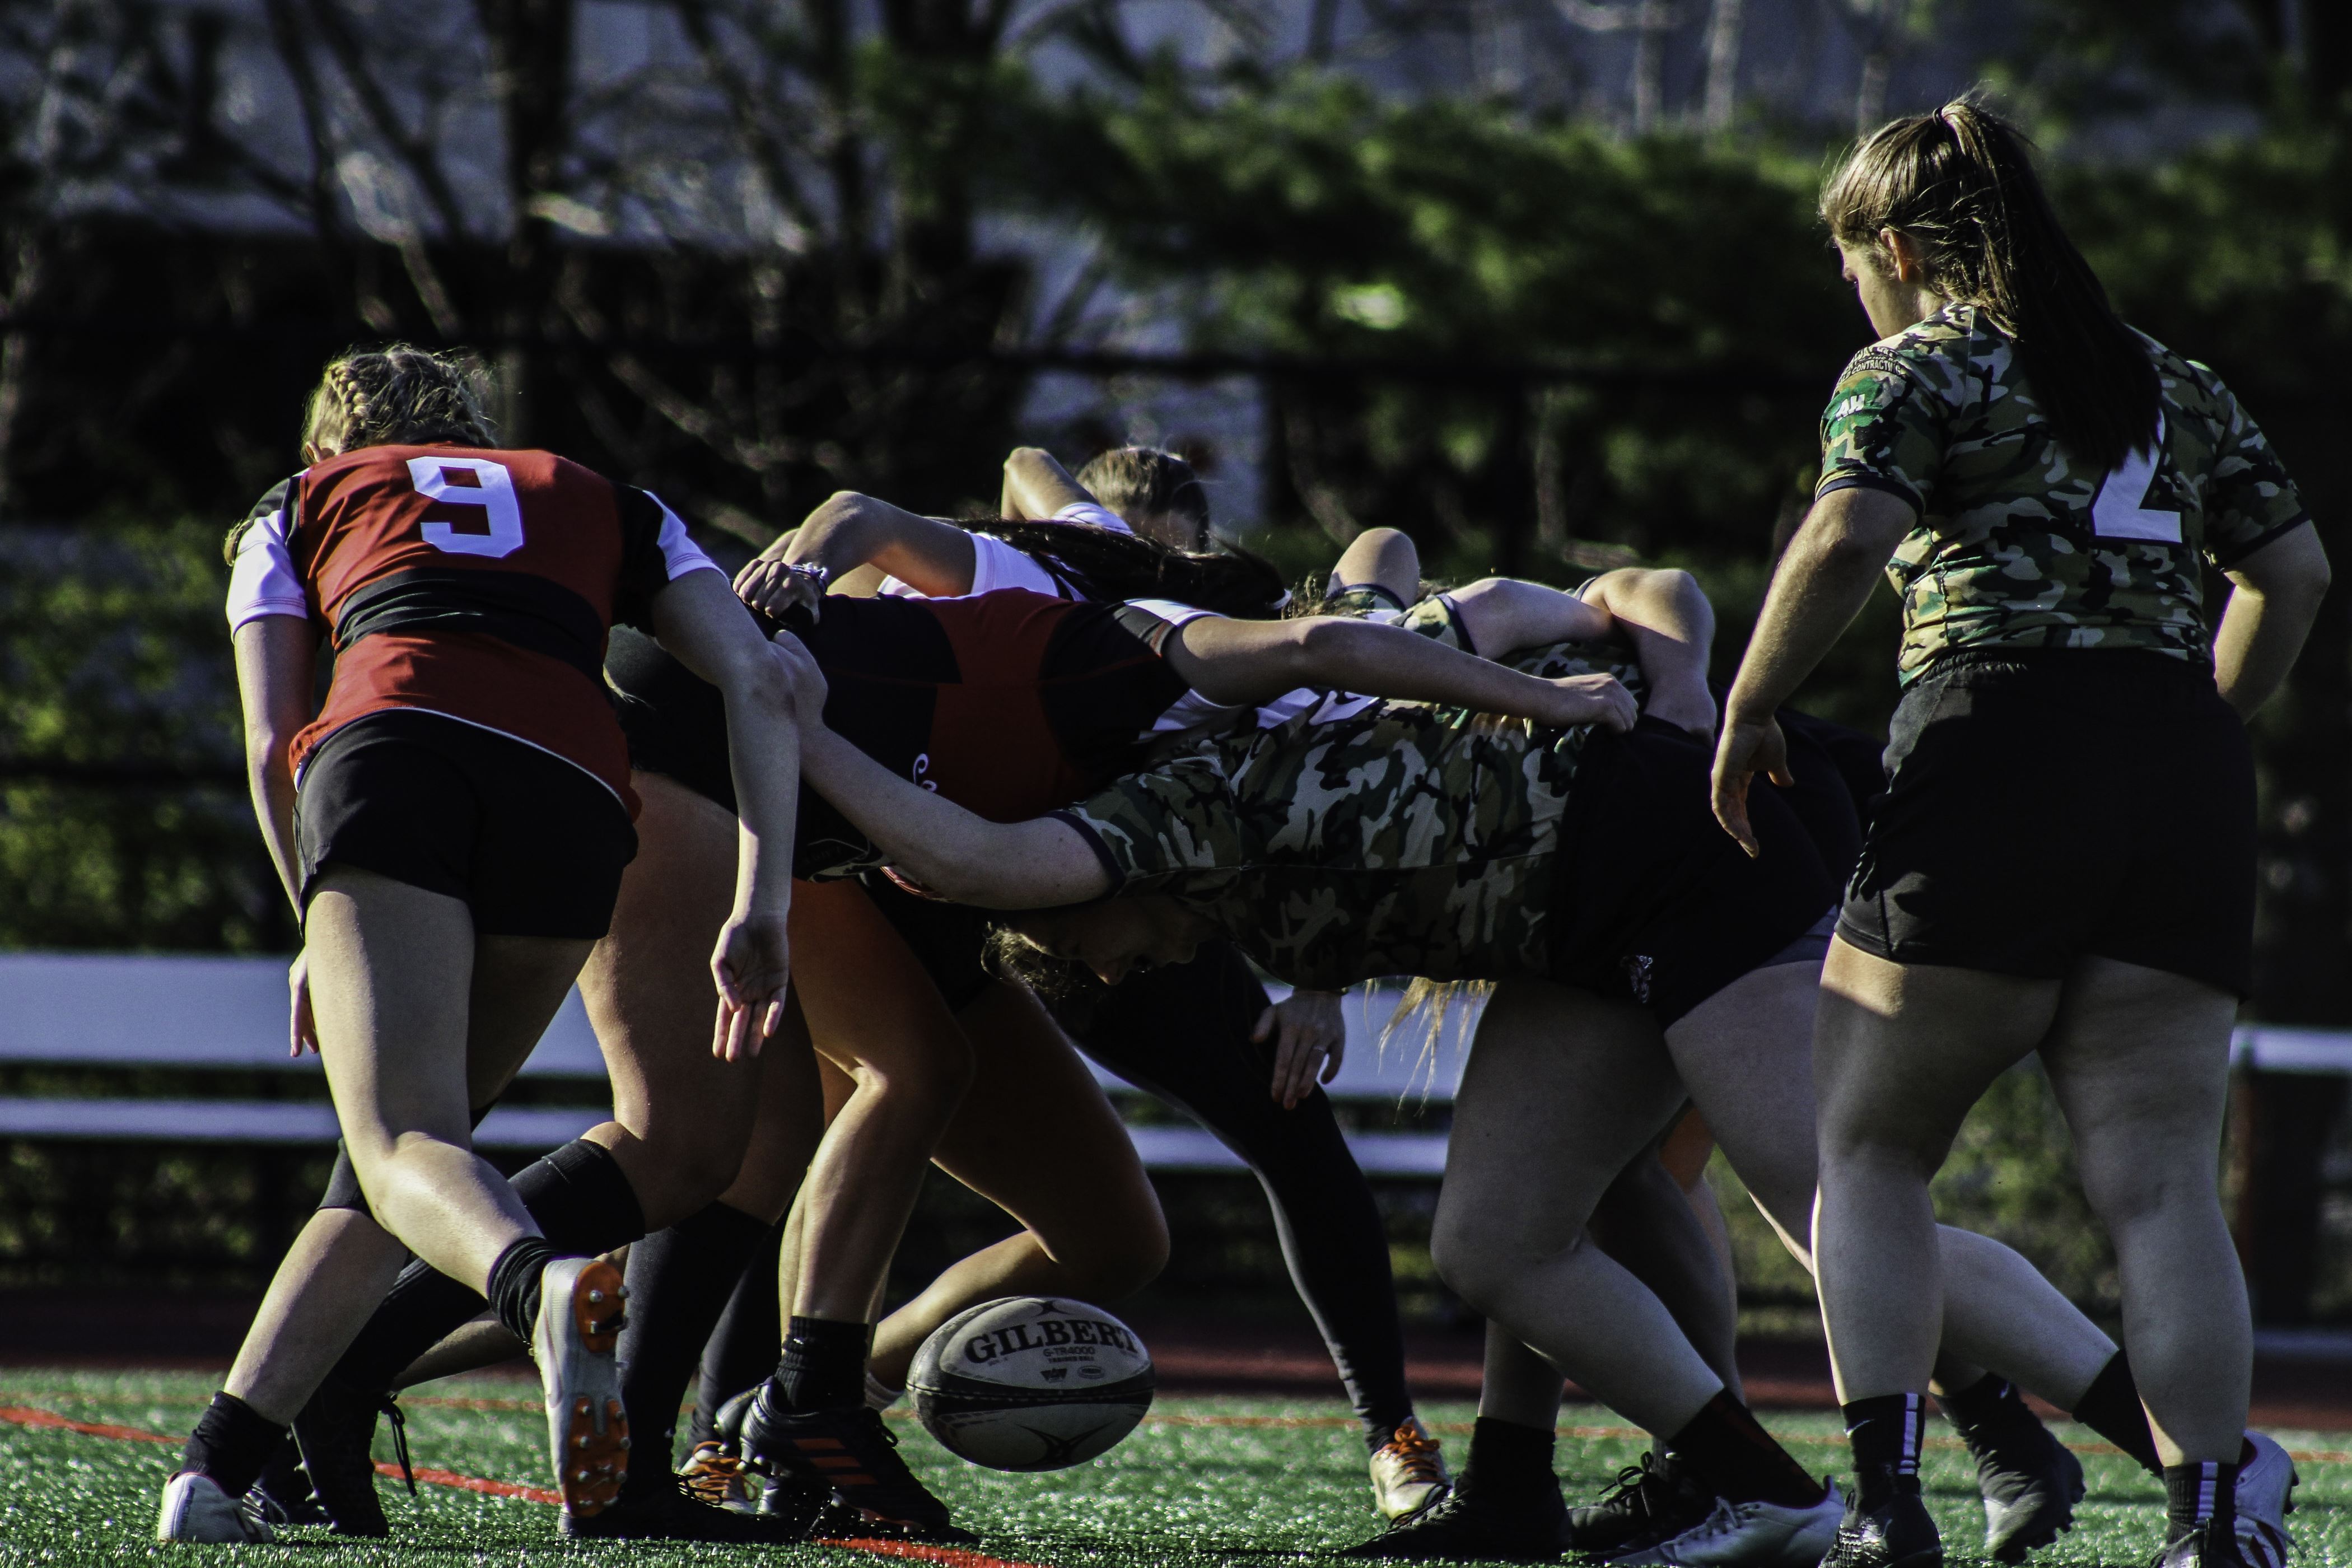 Both teams battle over the ball in a scrum, using their feet to knock the ball towards their side/